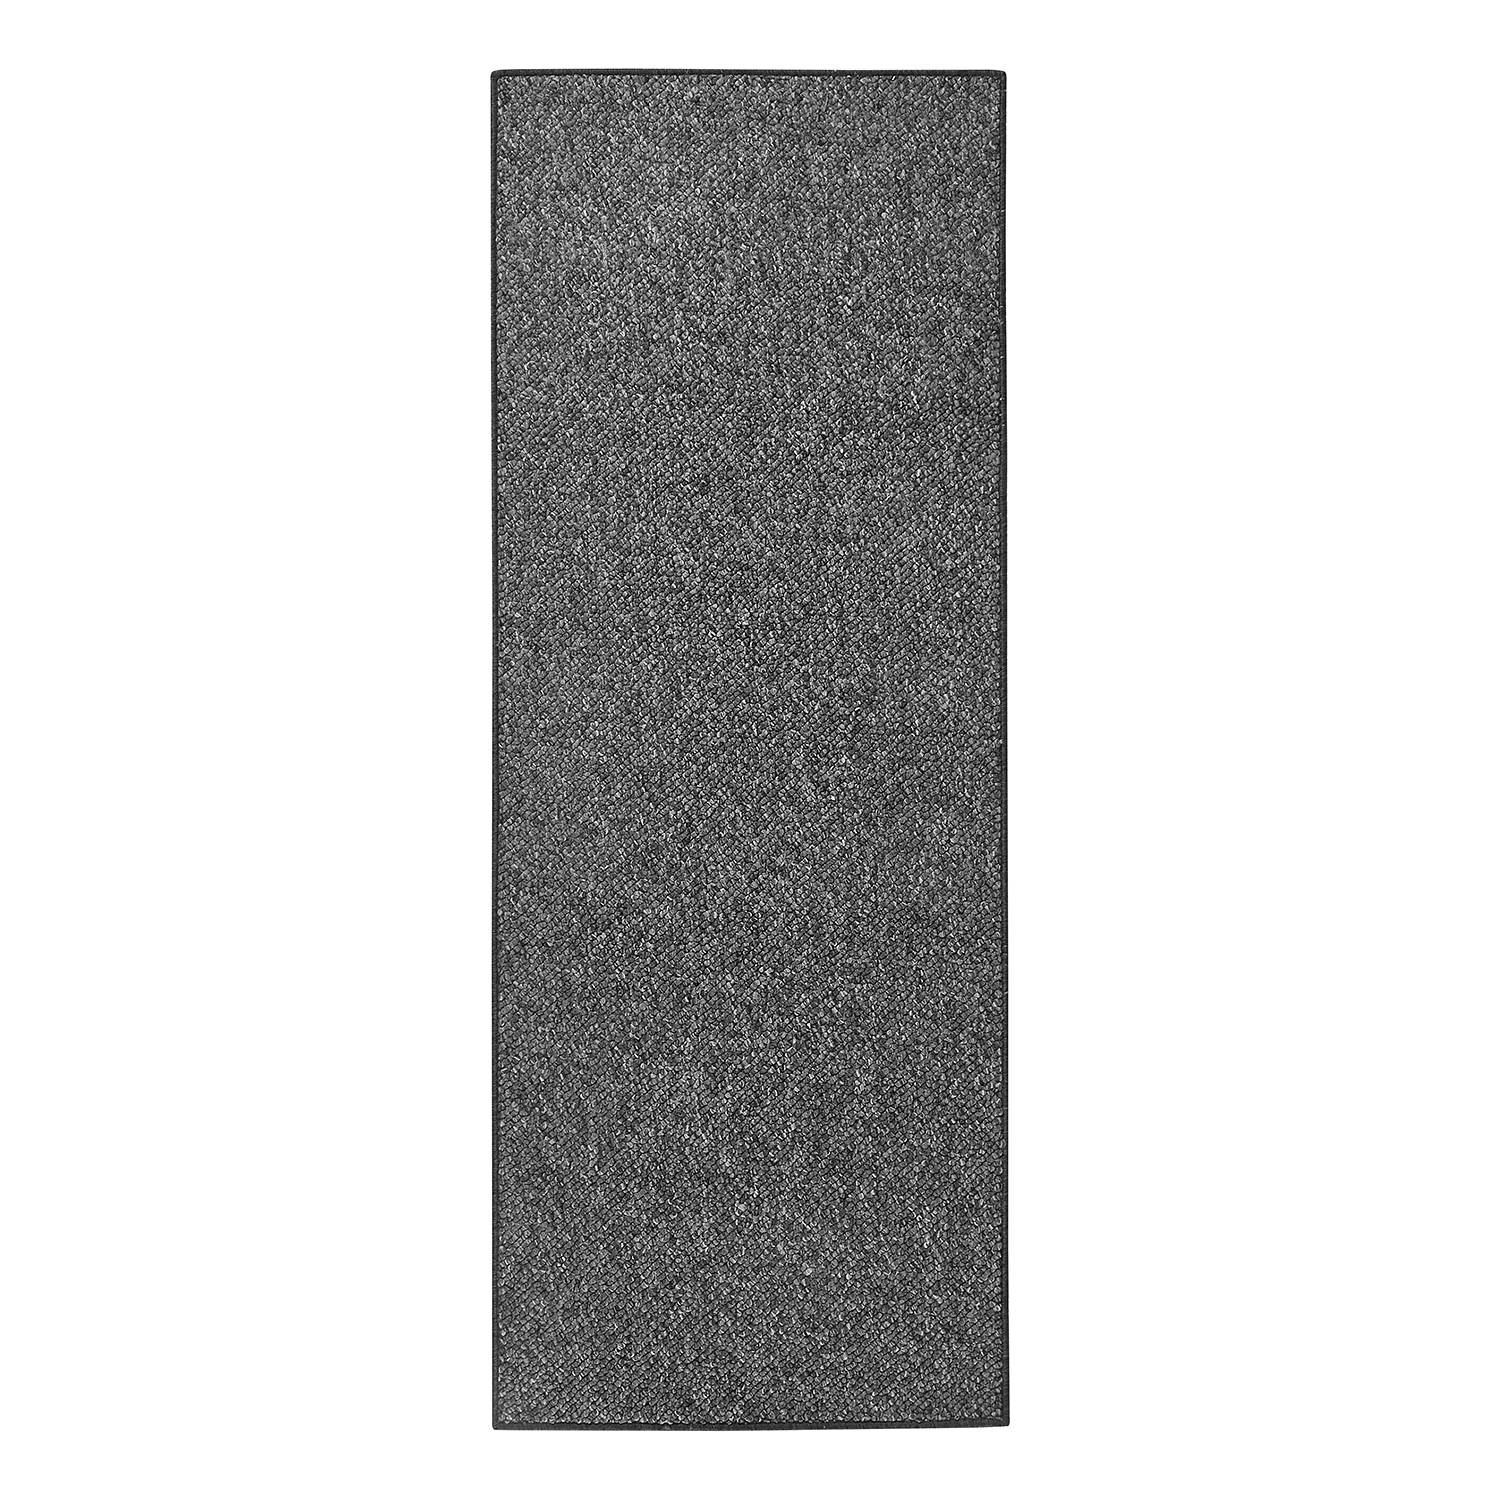 Image of Tapis de couloir Wolly 000000001000122559